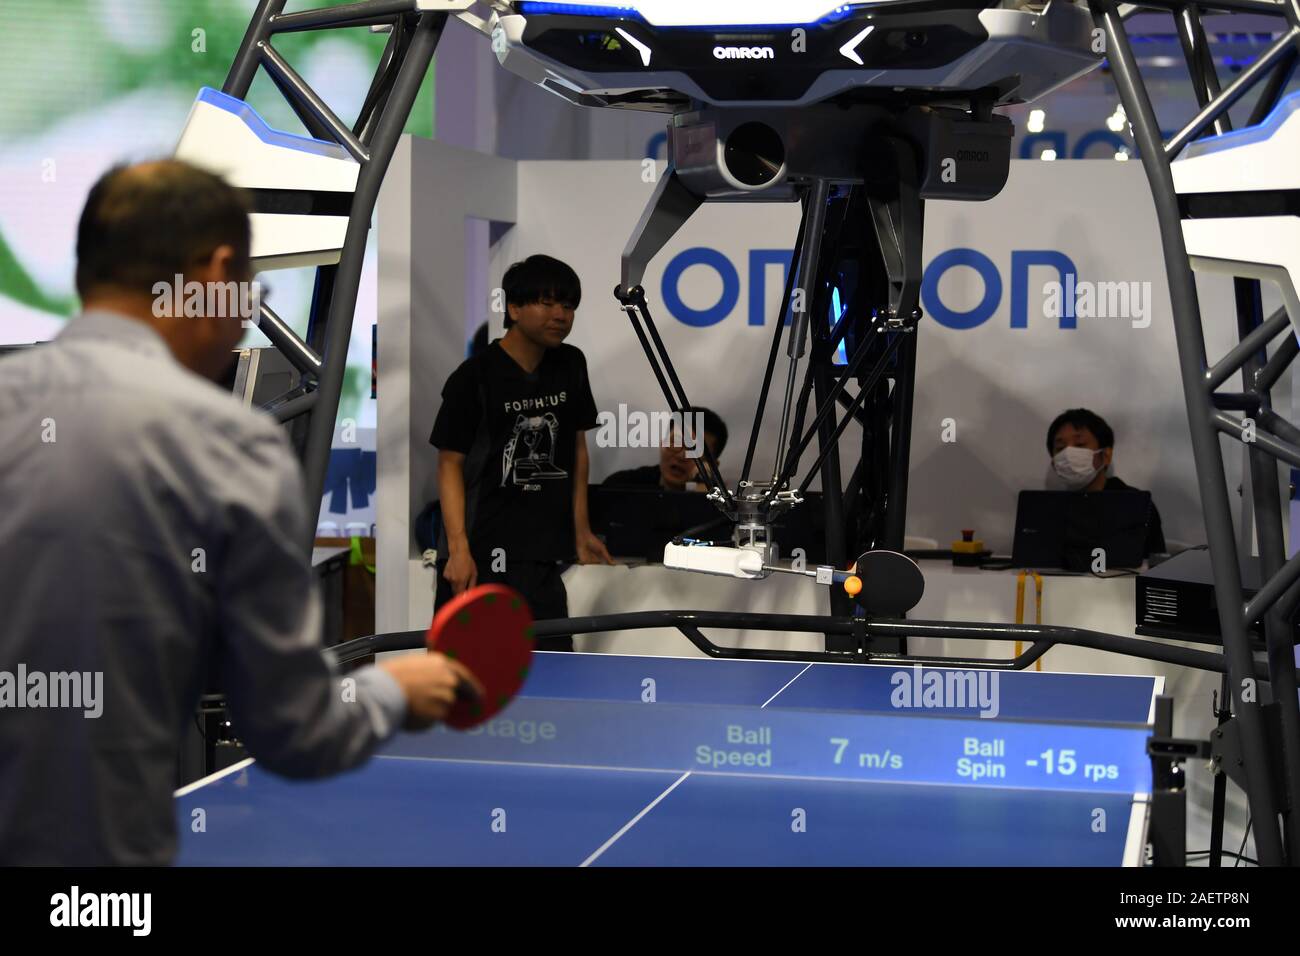 A person plays ping-pong with Forpheus, the ping-pong robot designed by  Omron at the second China International Import Expo (CIIE) in Shanghai,  China Stock Photo - Alamy